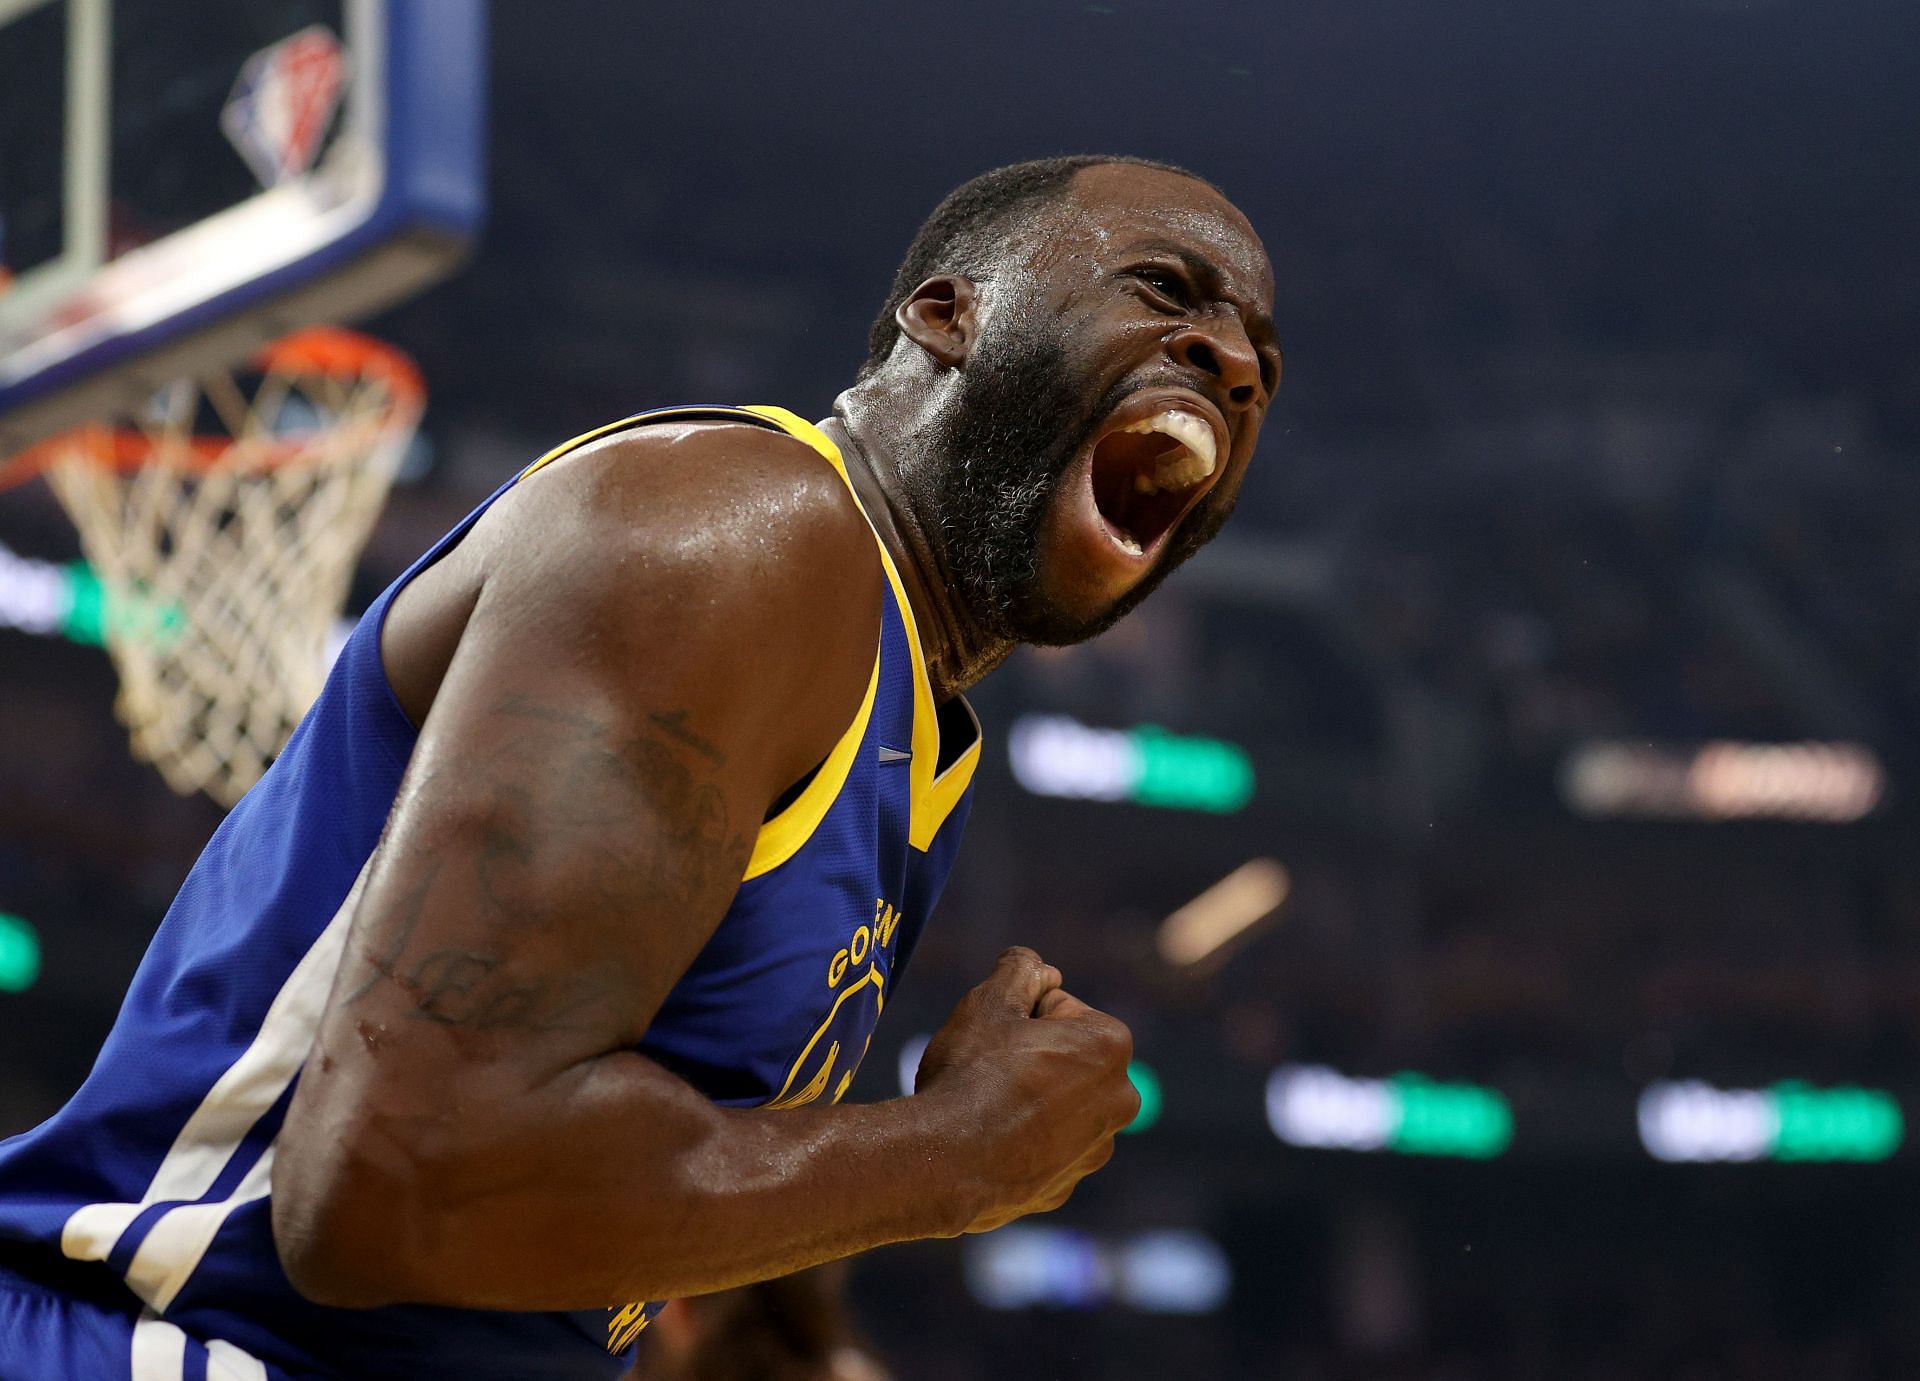 Draymond Green of the Golden State Warriors reacts against the Memphis Grizzlies